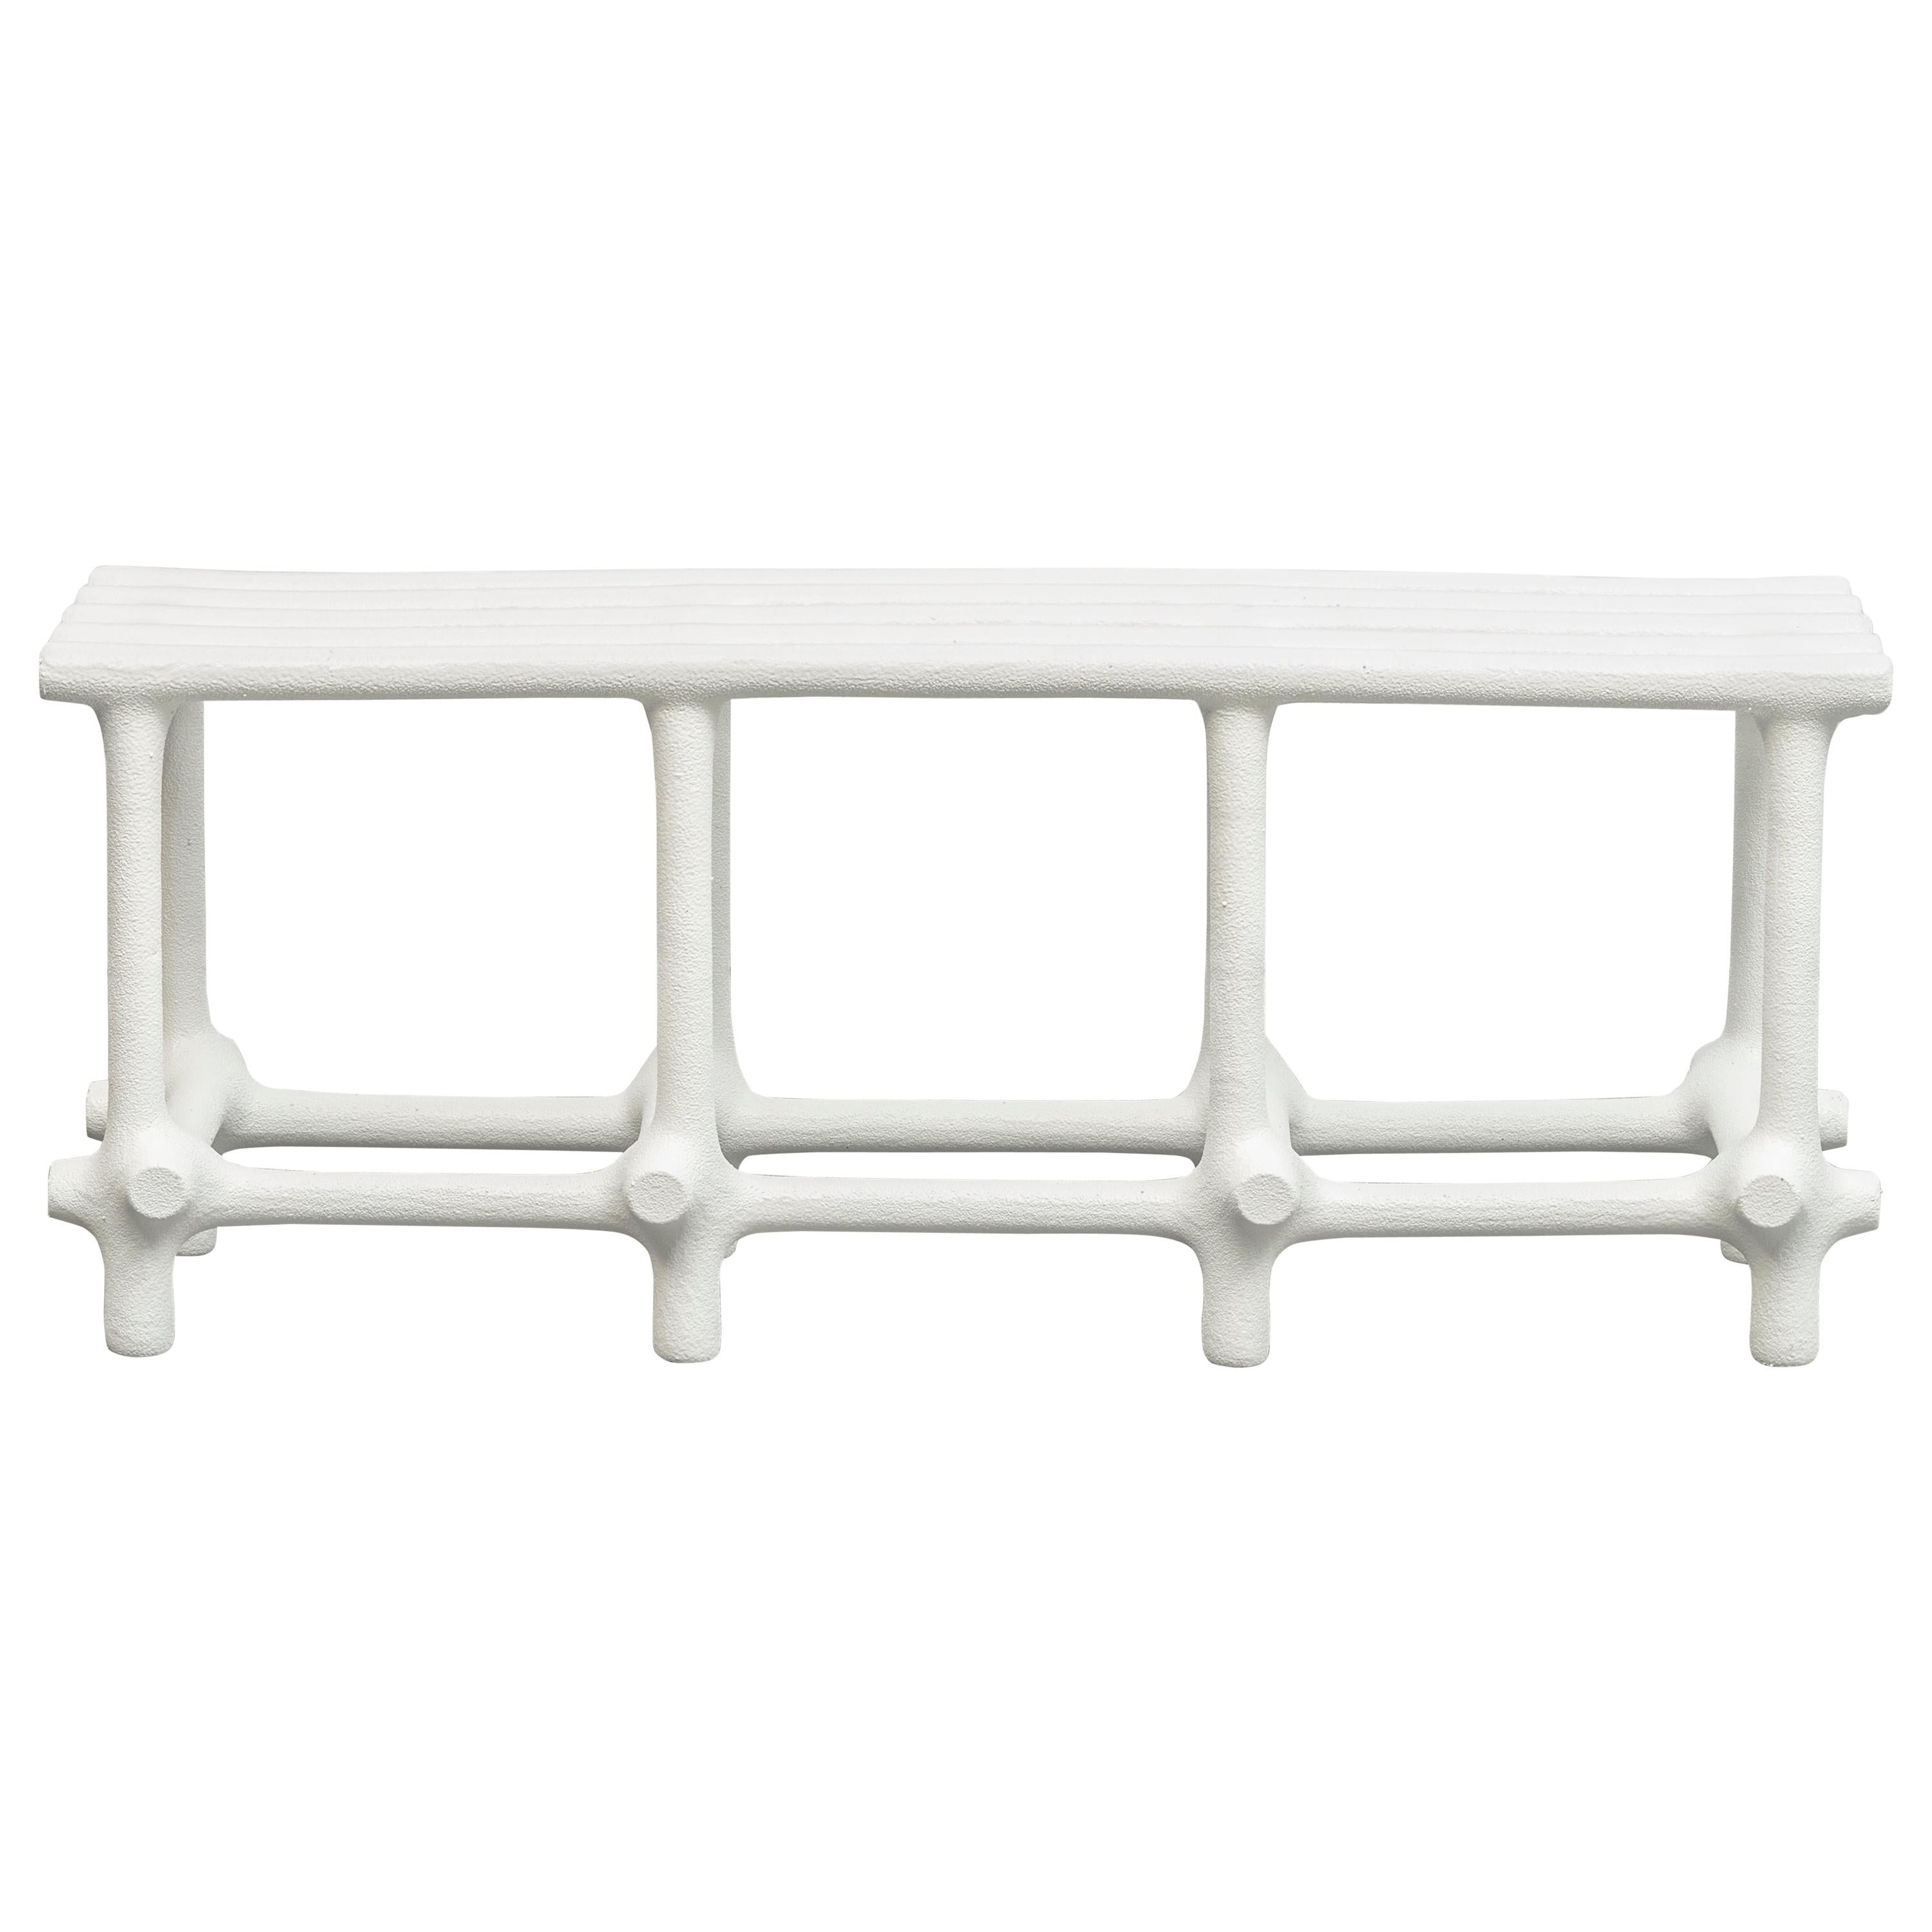 Bench Series Contemporary Seating For Sale